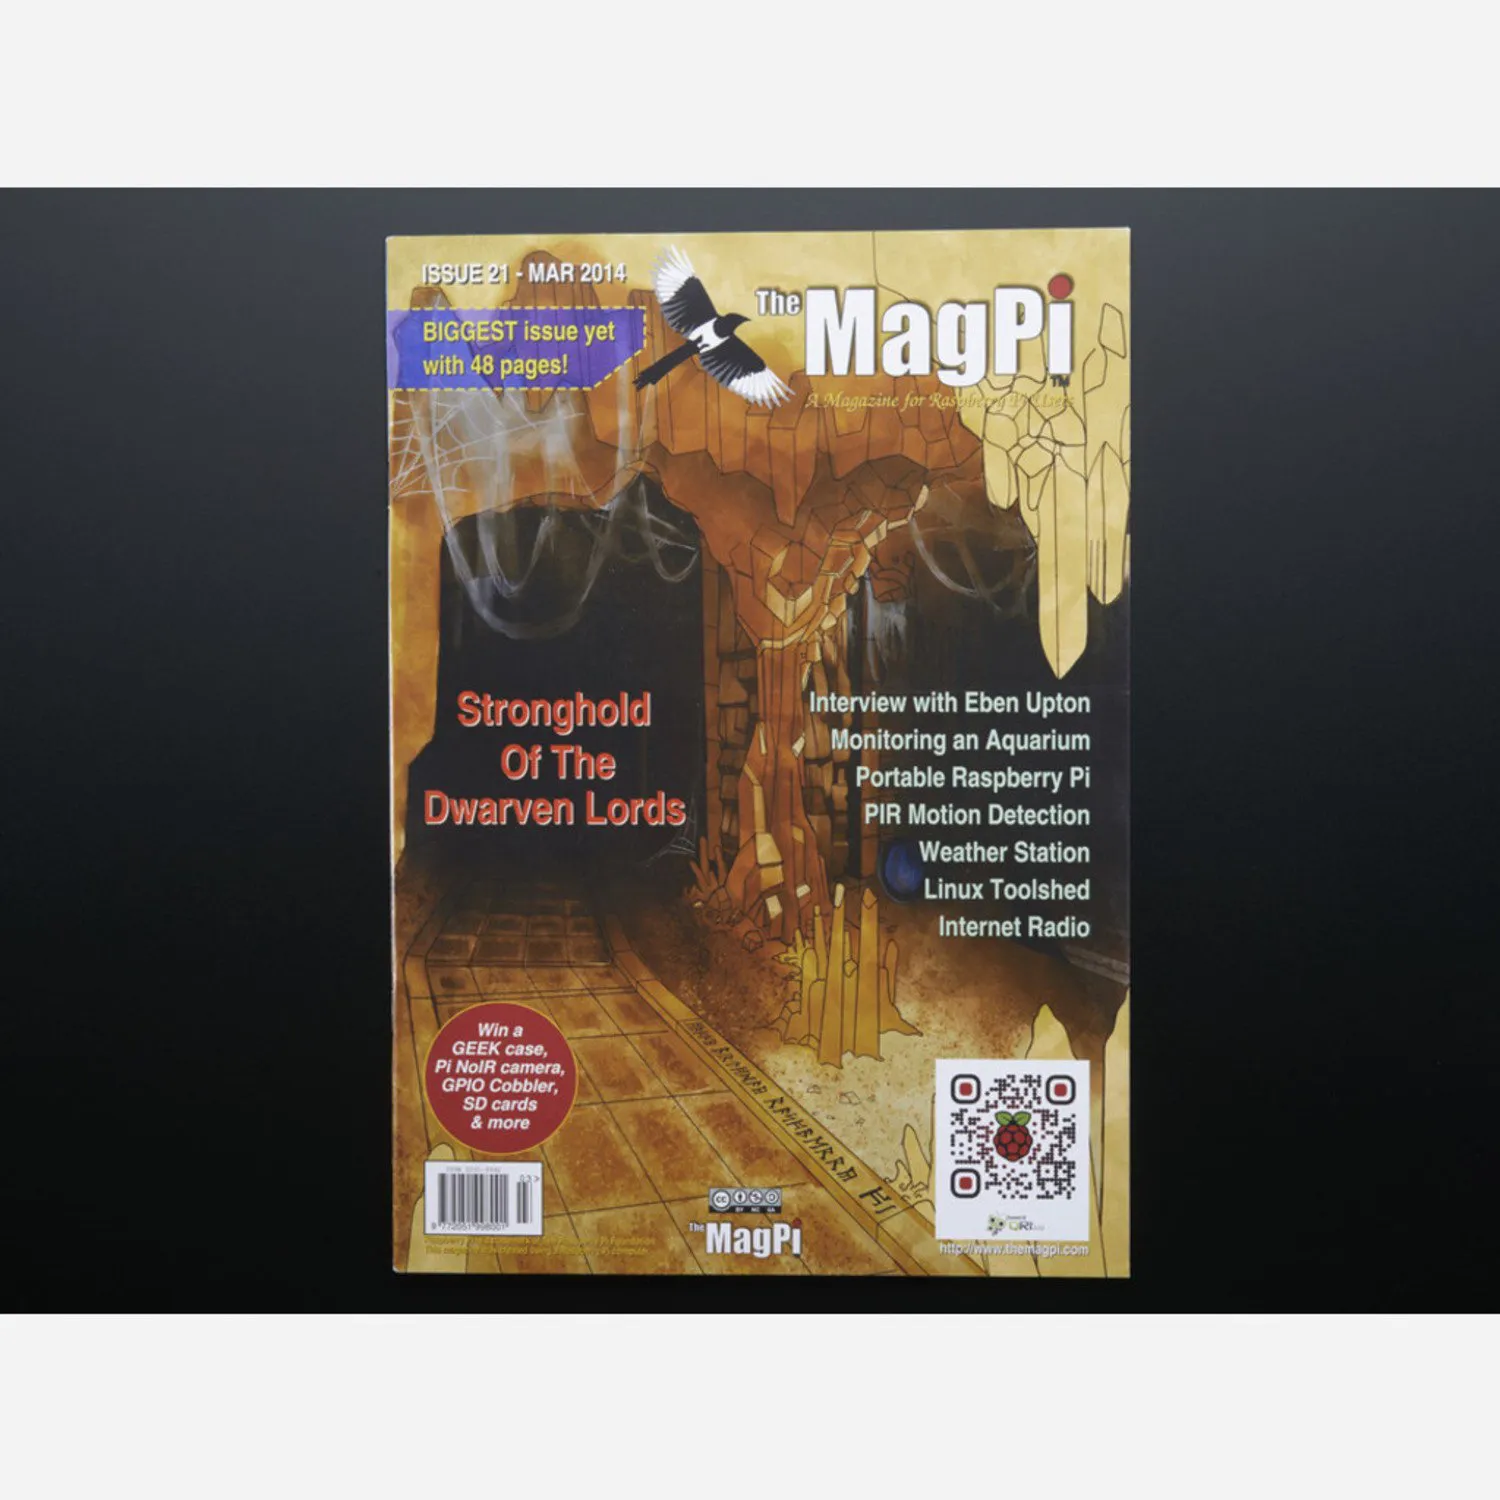 Photo of The MagPi - Issue 21